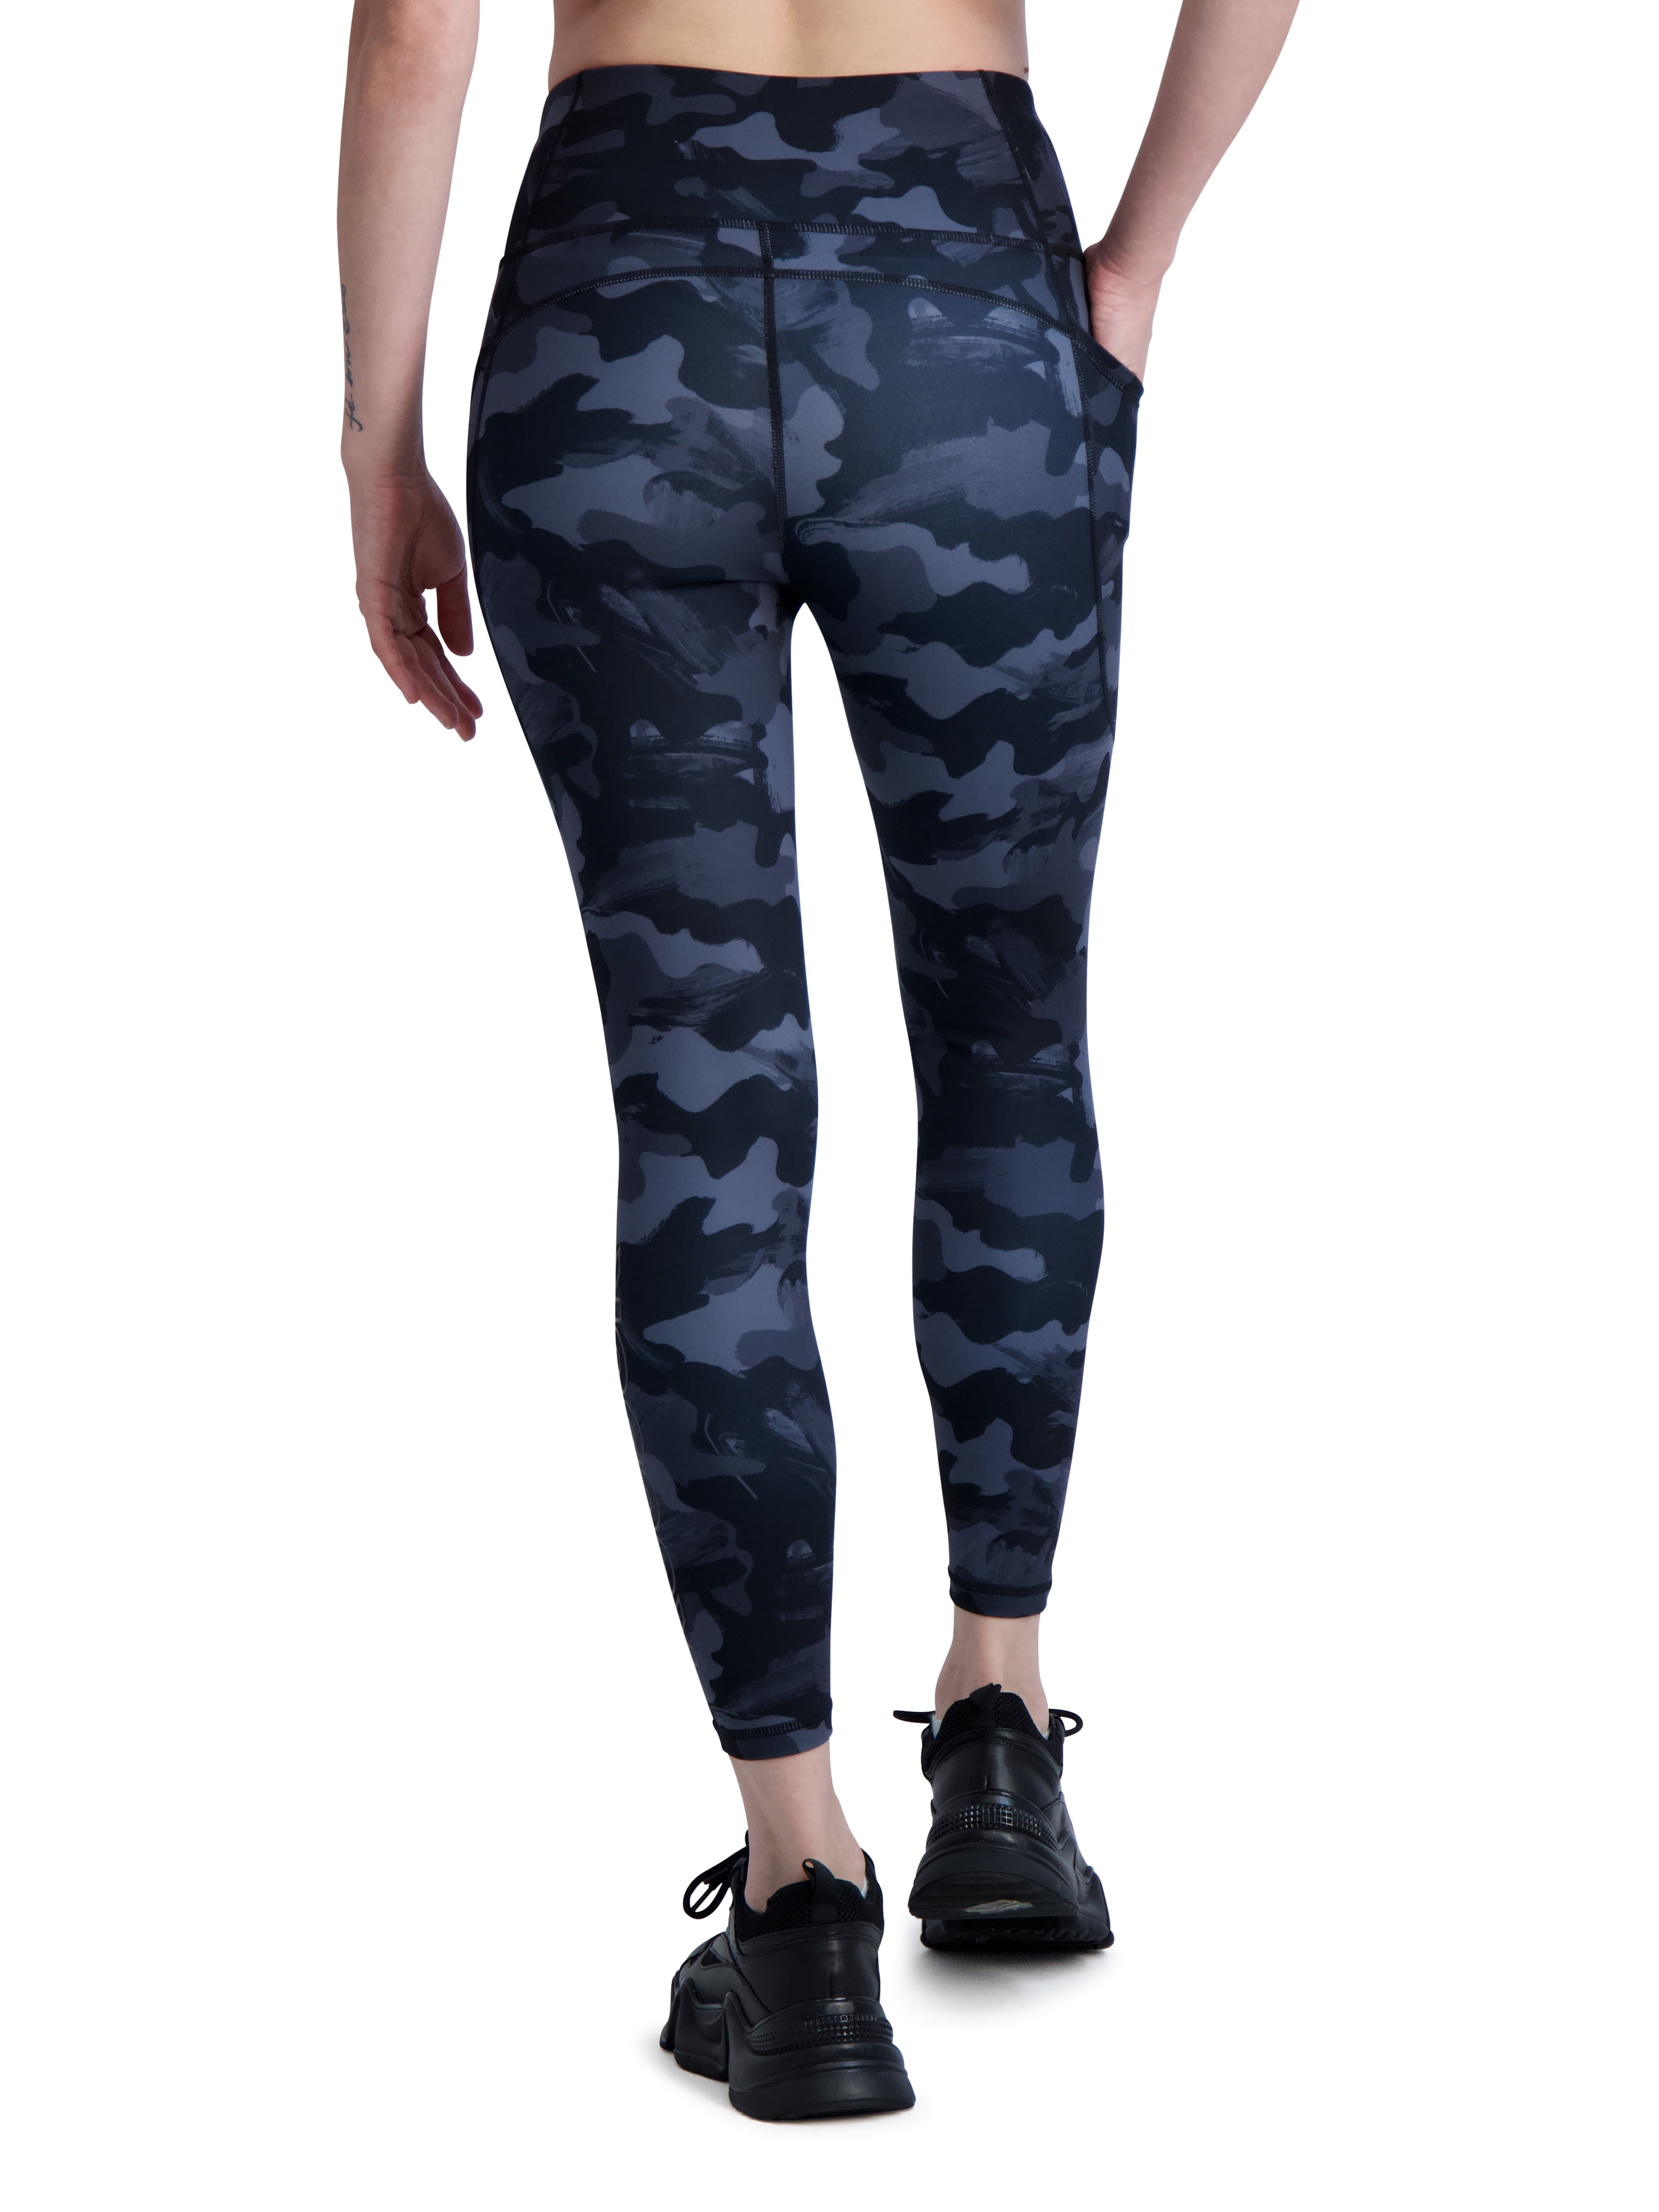 Camouflage Print 7/8th Length Leggings For Women – MICHELLE SALINS